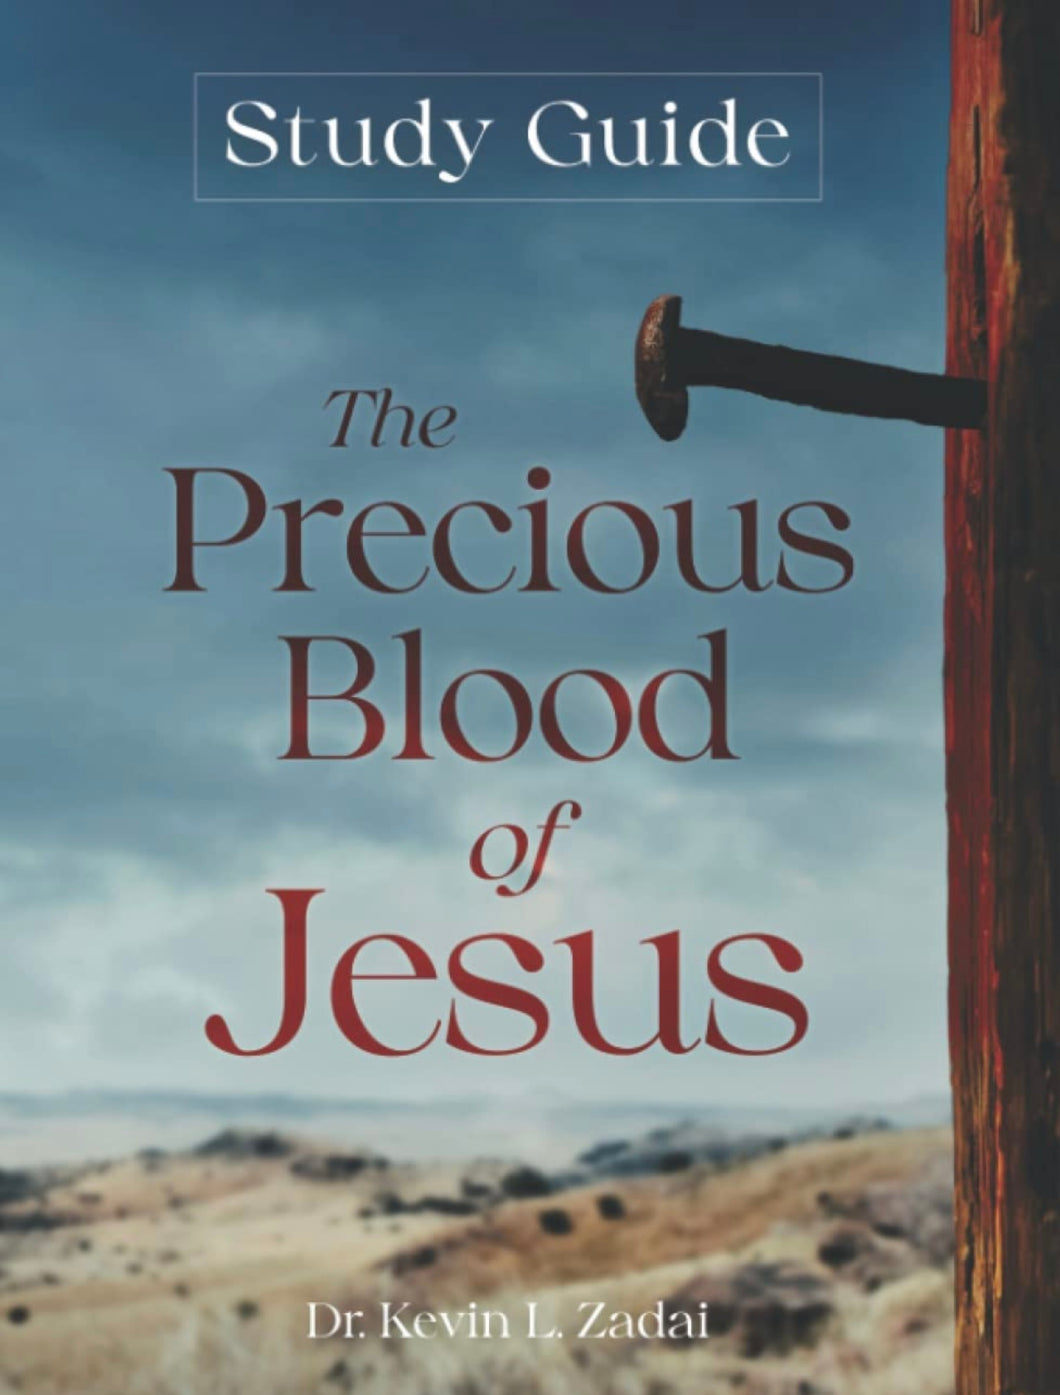 The Precious Blood of Jesus - Study Guide